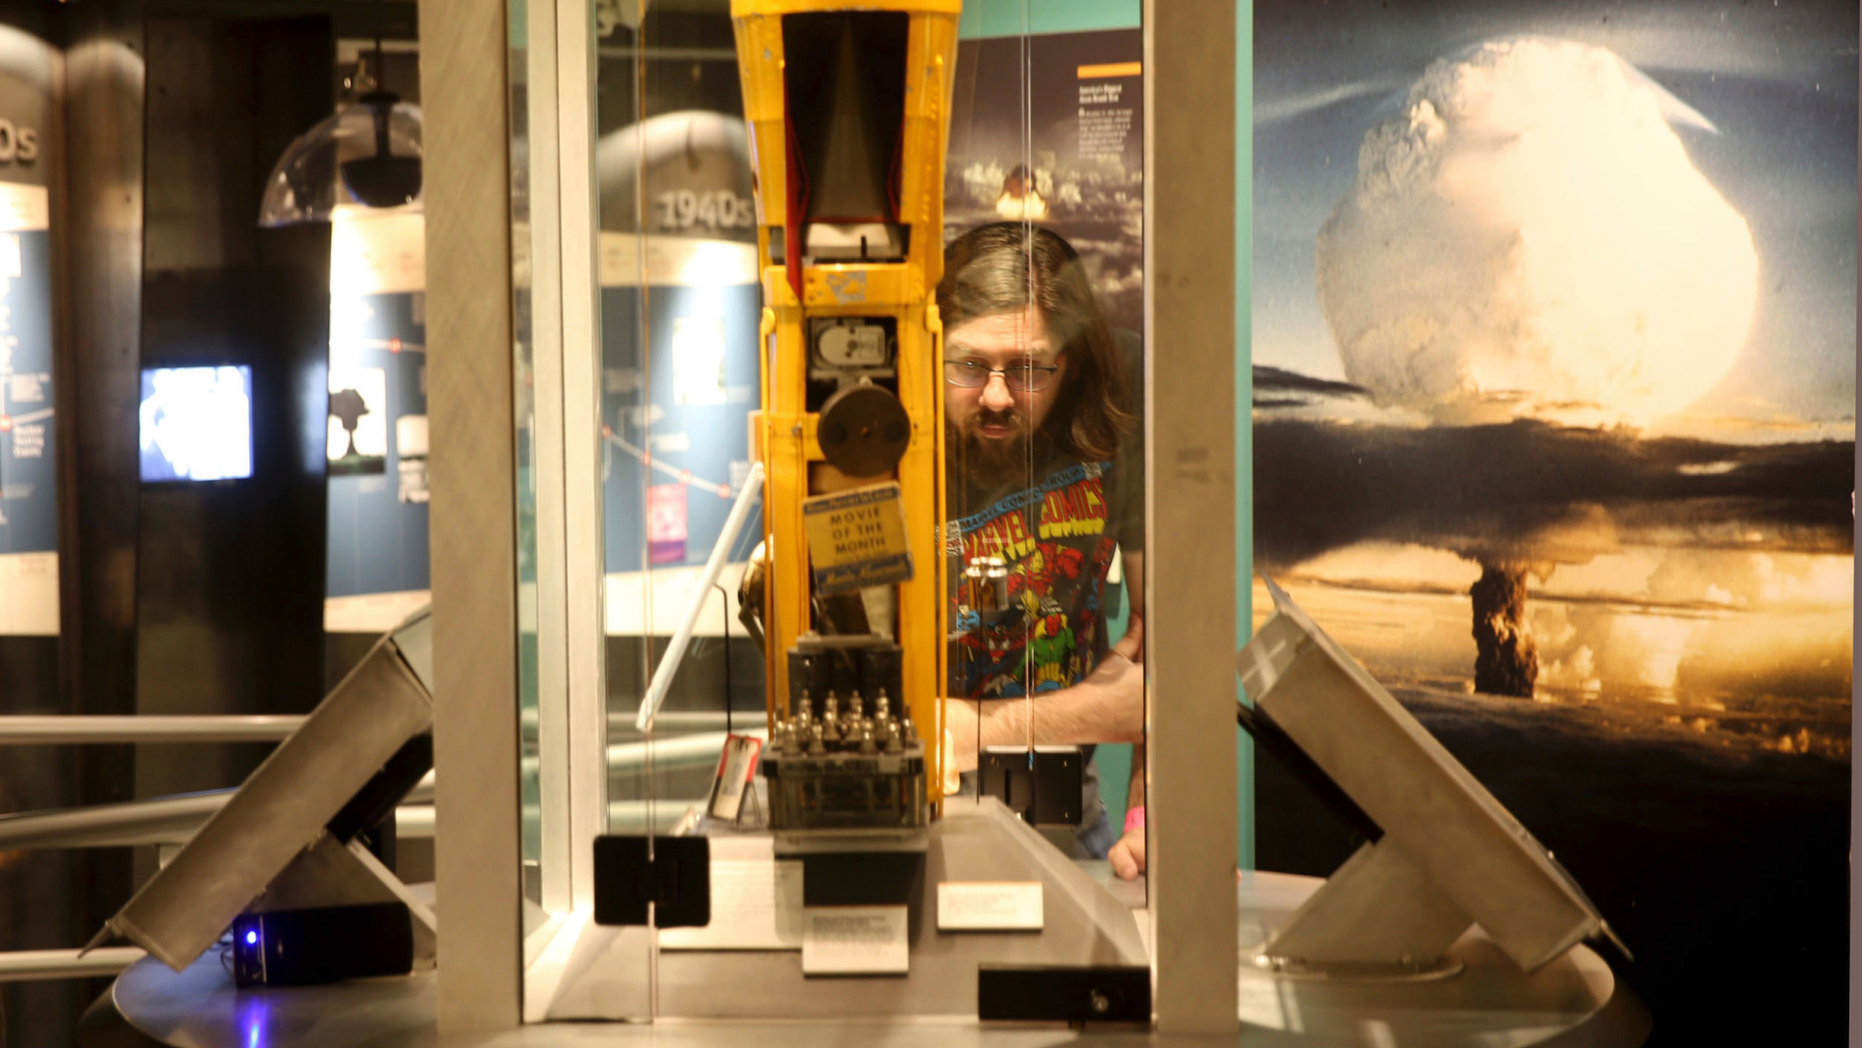 On this photo of Monday, June 10, 2019, a visitor visits the National Atomic Testing Museum in Las Vegas. Museum officials say that they have exceeded their space east of the Las Vegas Strip and that they are looking for a new location to expand their exposures on nuclear testing. (K.M. Cannon / Las Vegas Review-Journal via AP)